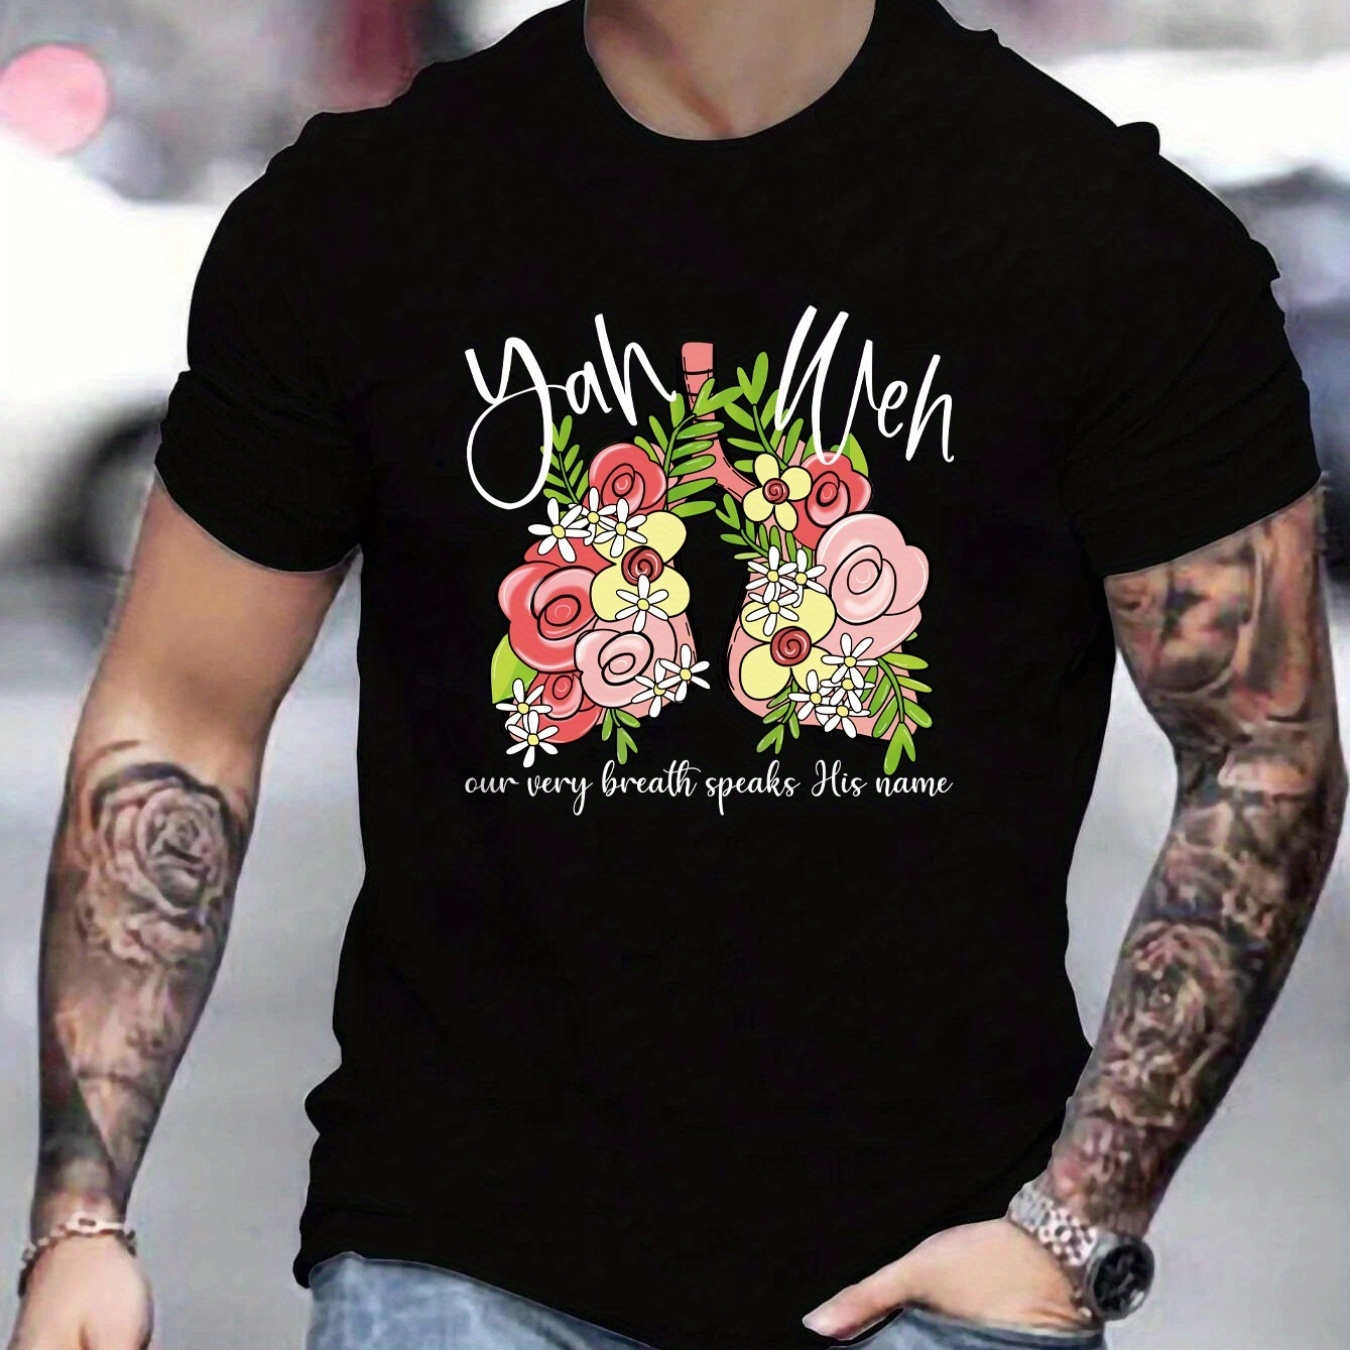 

'yah Weh Our Very Breath Speaks His Name' Flower Round Neck Graphic T-shirts, Causal Tees, Short Sleeves Comfortable Tops, Men's Summer Clothing